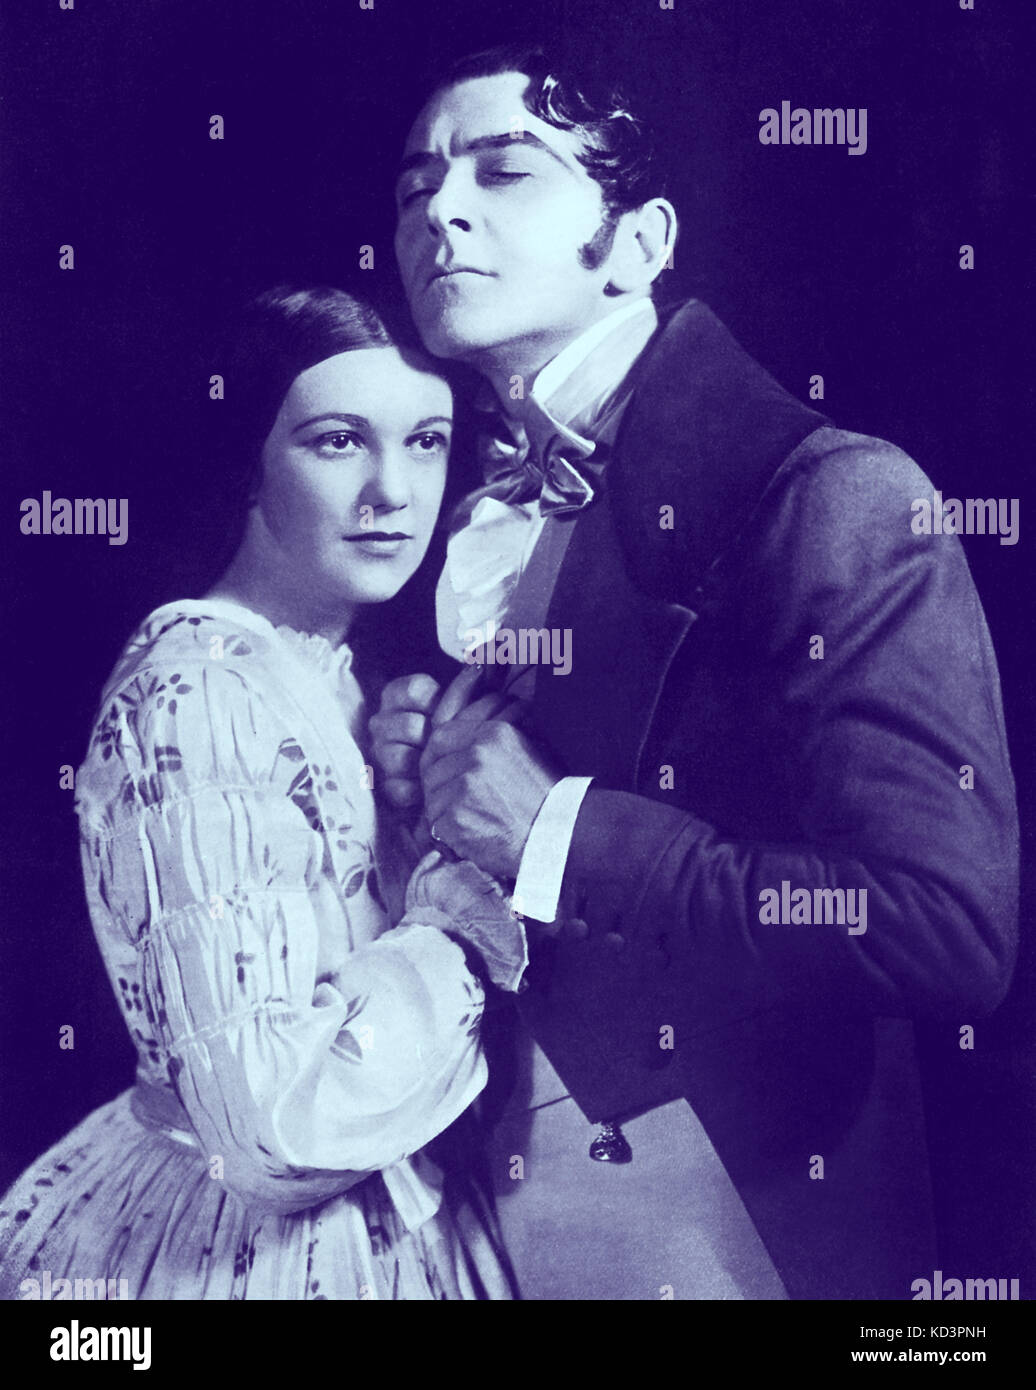 'Jane Eyre' with Reginald Tate as Mr Rochester and Curigwen Lewis as Jane.  'To be your wife is for me to be as happy as I can be on earth'. Cyril Phillips 's production,  the Queen's Theatre, London, 1936. Based on the novel by Charlotte Bronte. RT, English actor, 13 December 1896 – 23 August 1955. Stock Photo